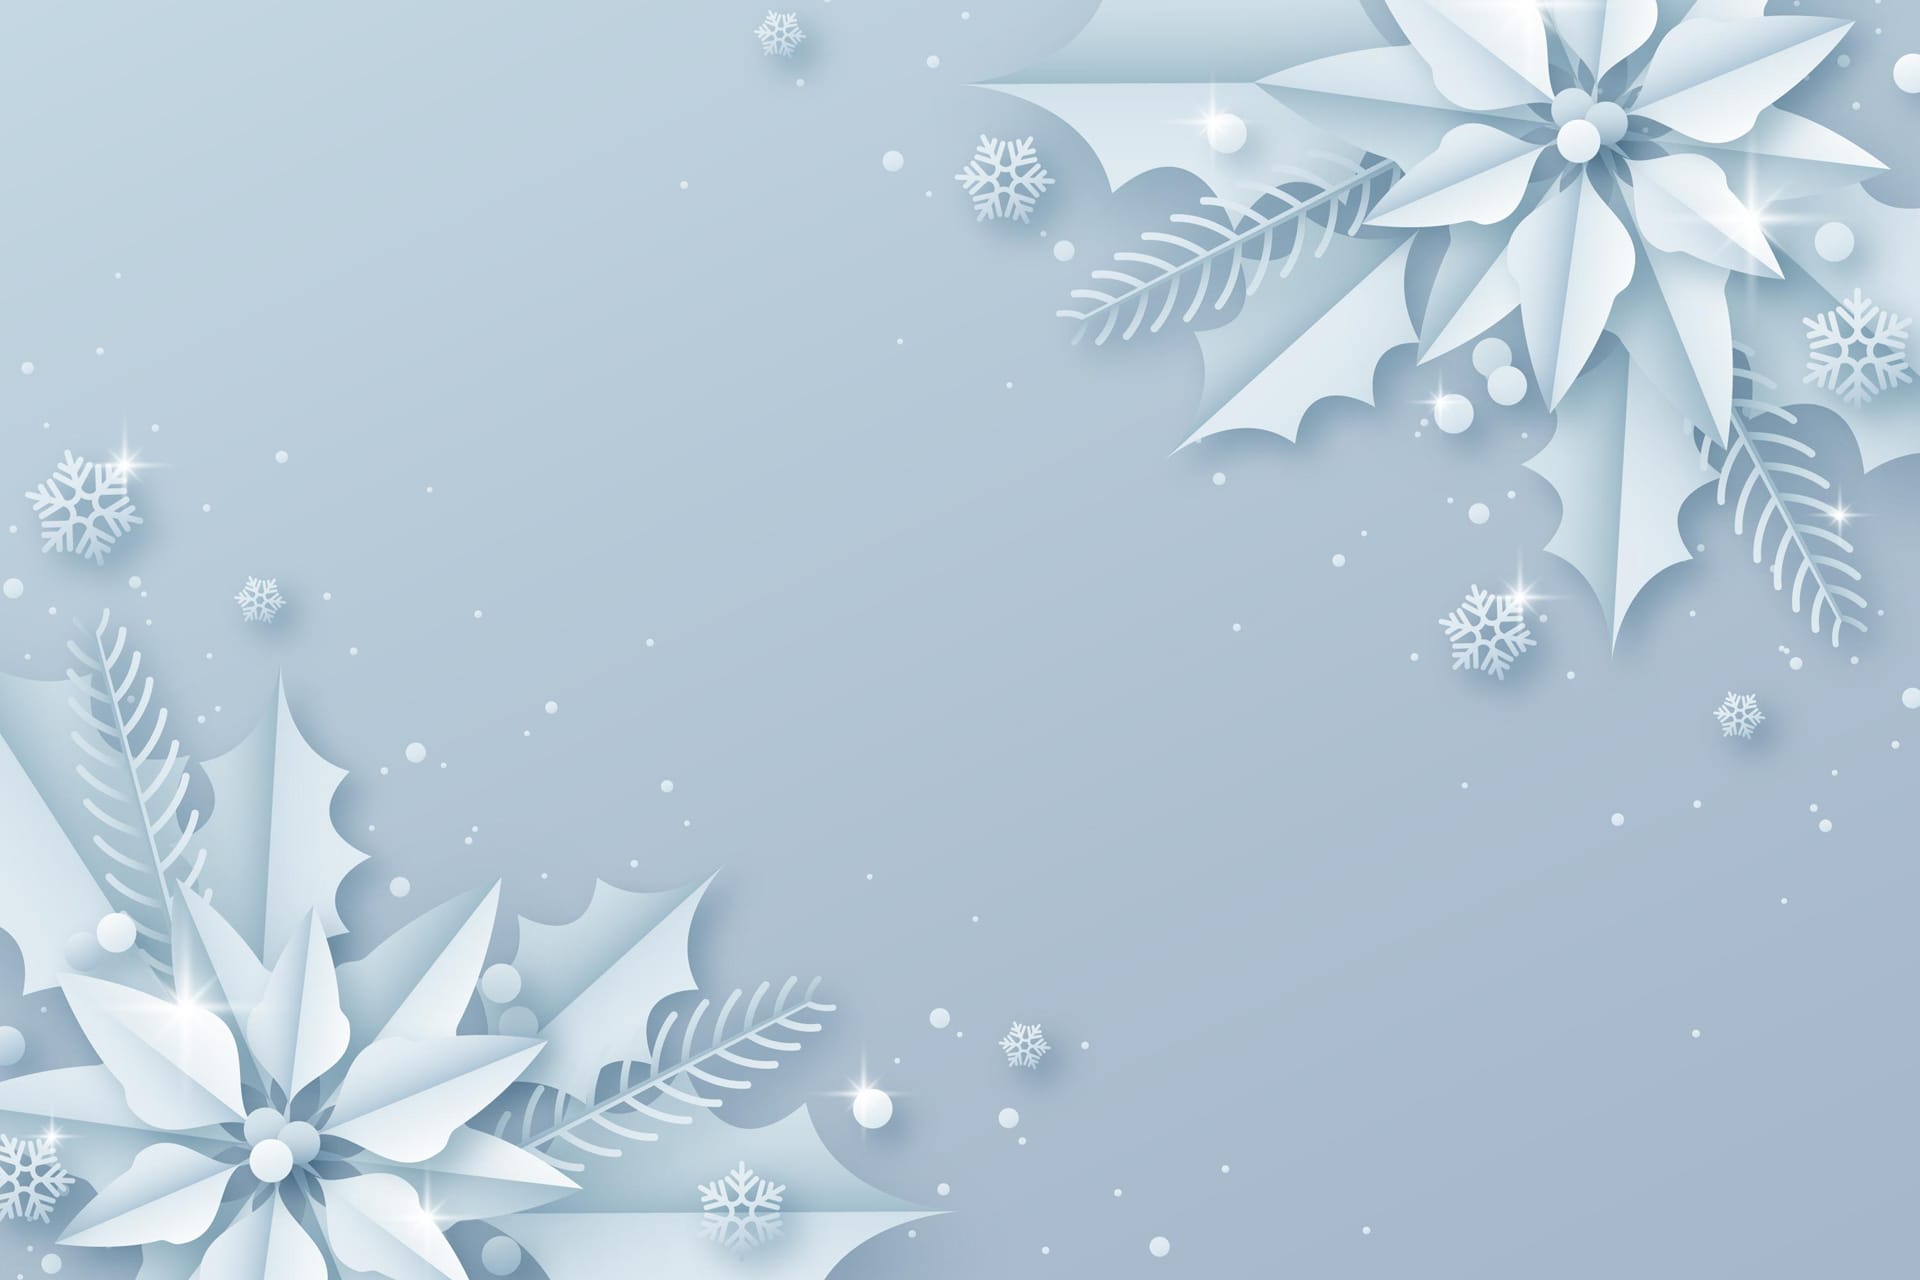 Paper style winter background